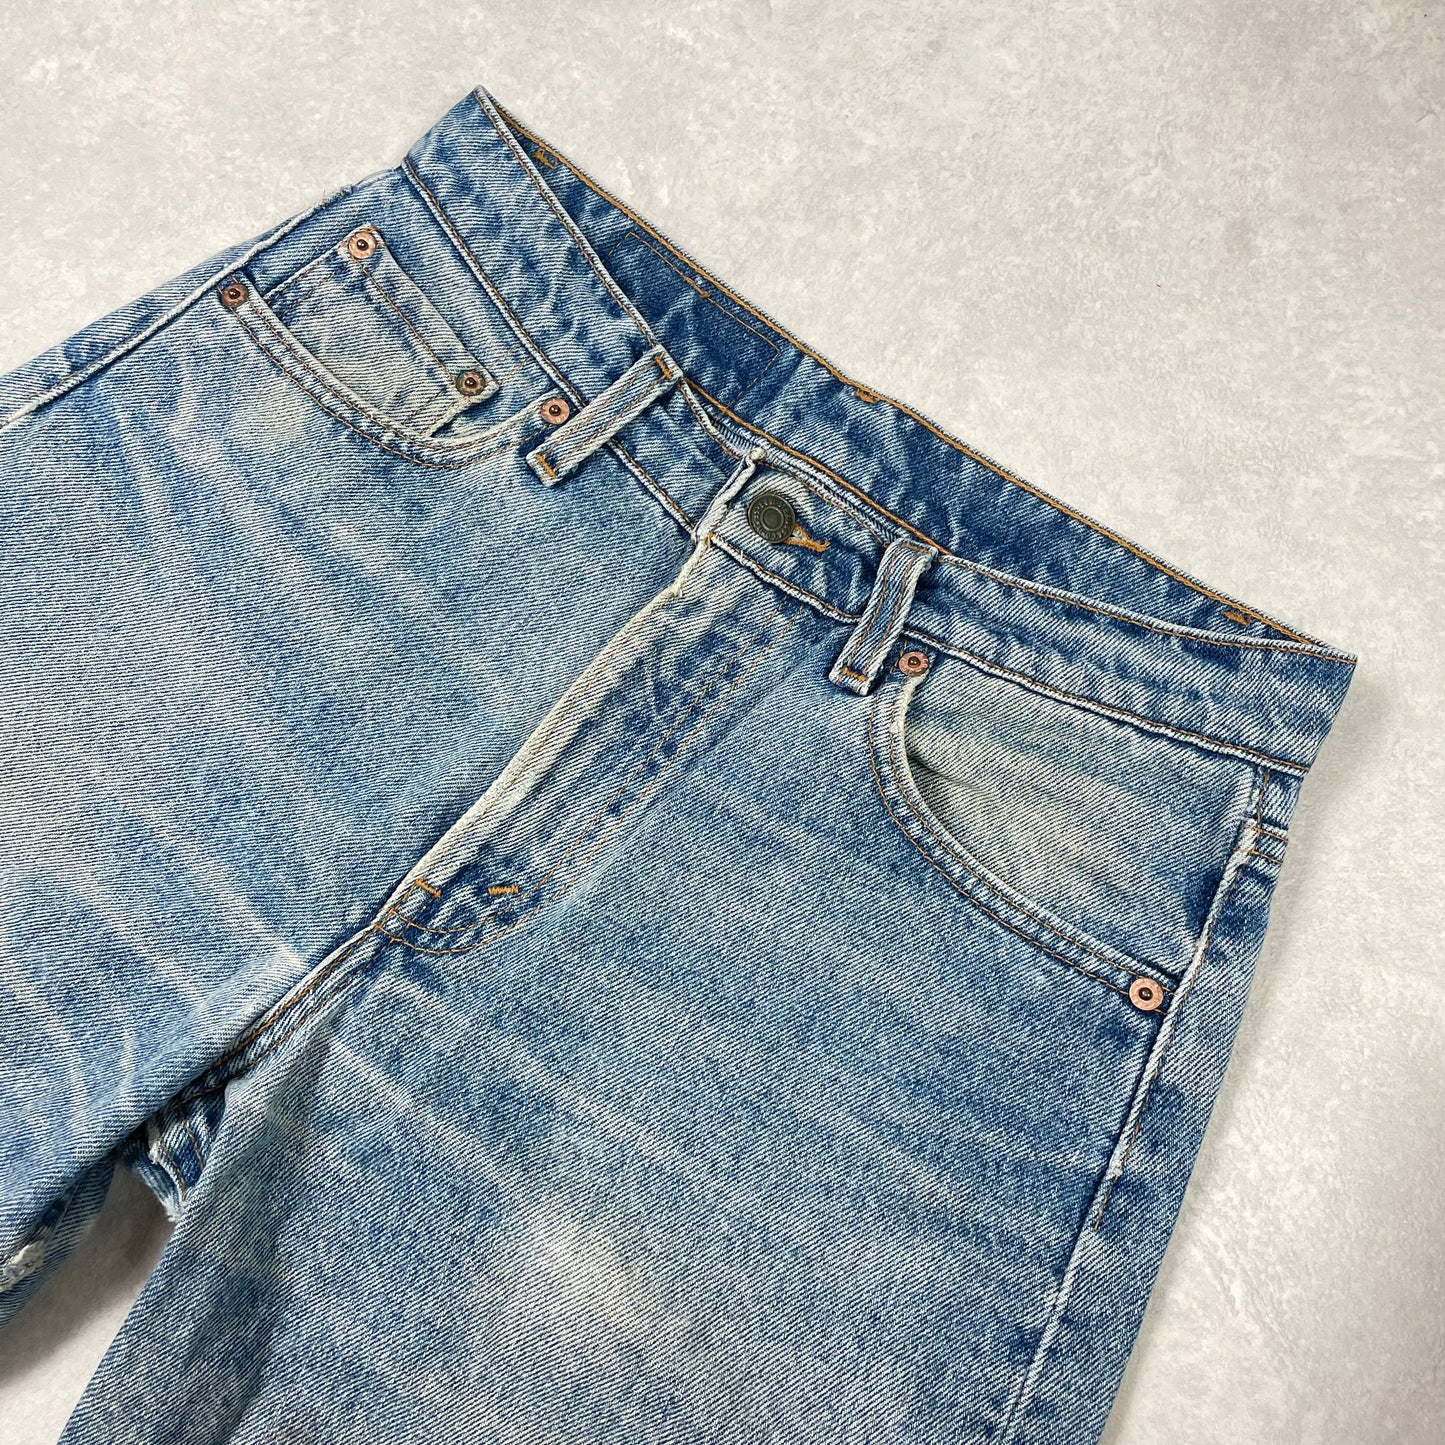 Vintage Levi’s 550 Jeans Made in USA 30x32